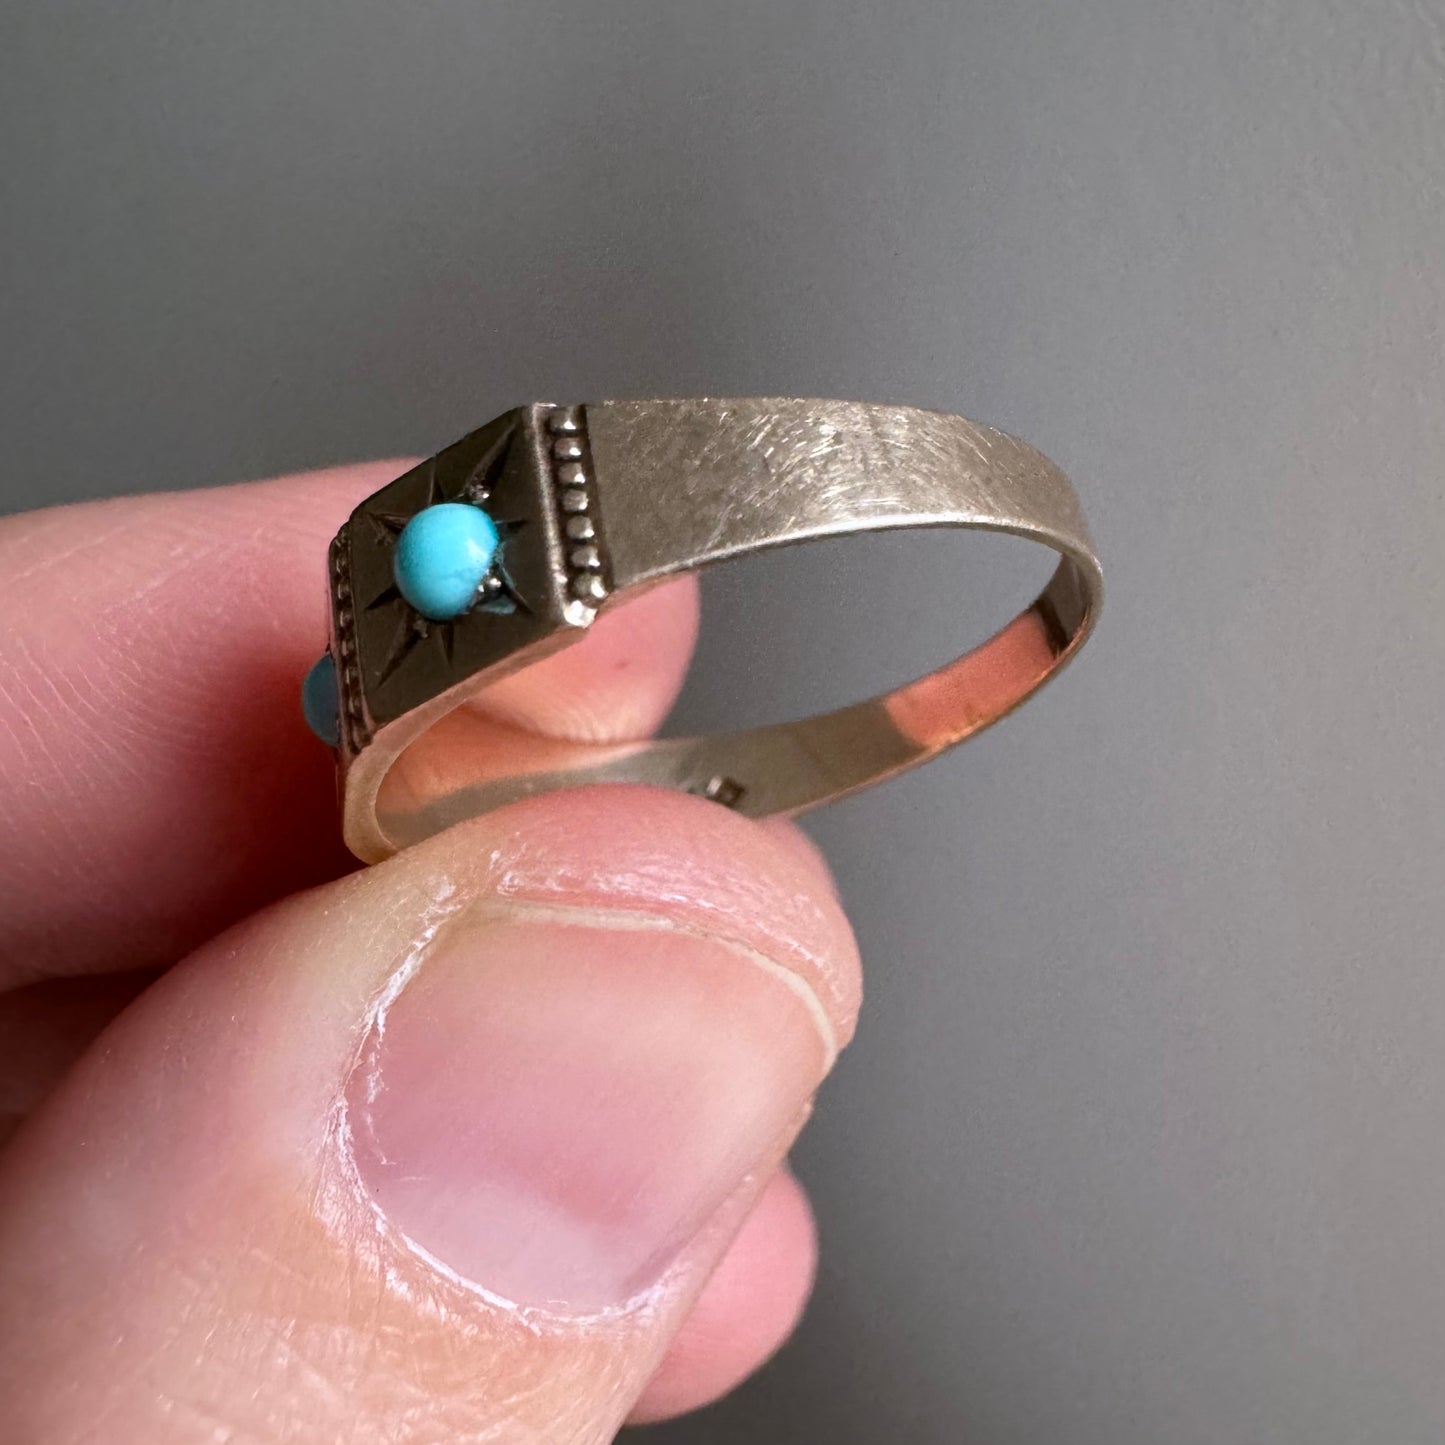 reimagined A N T I Q U E // 10k rosy yellow gold starburst trilogy band with opal and turquoise / size 7.75